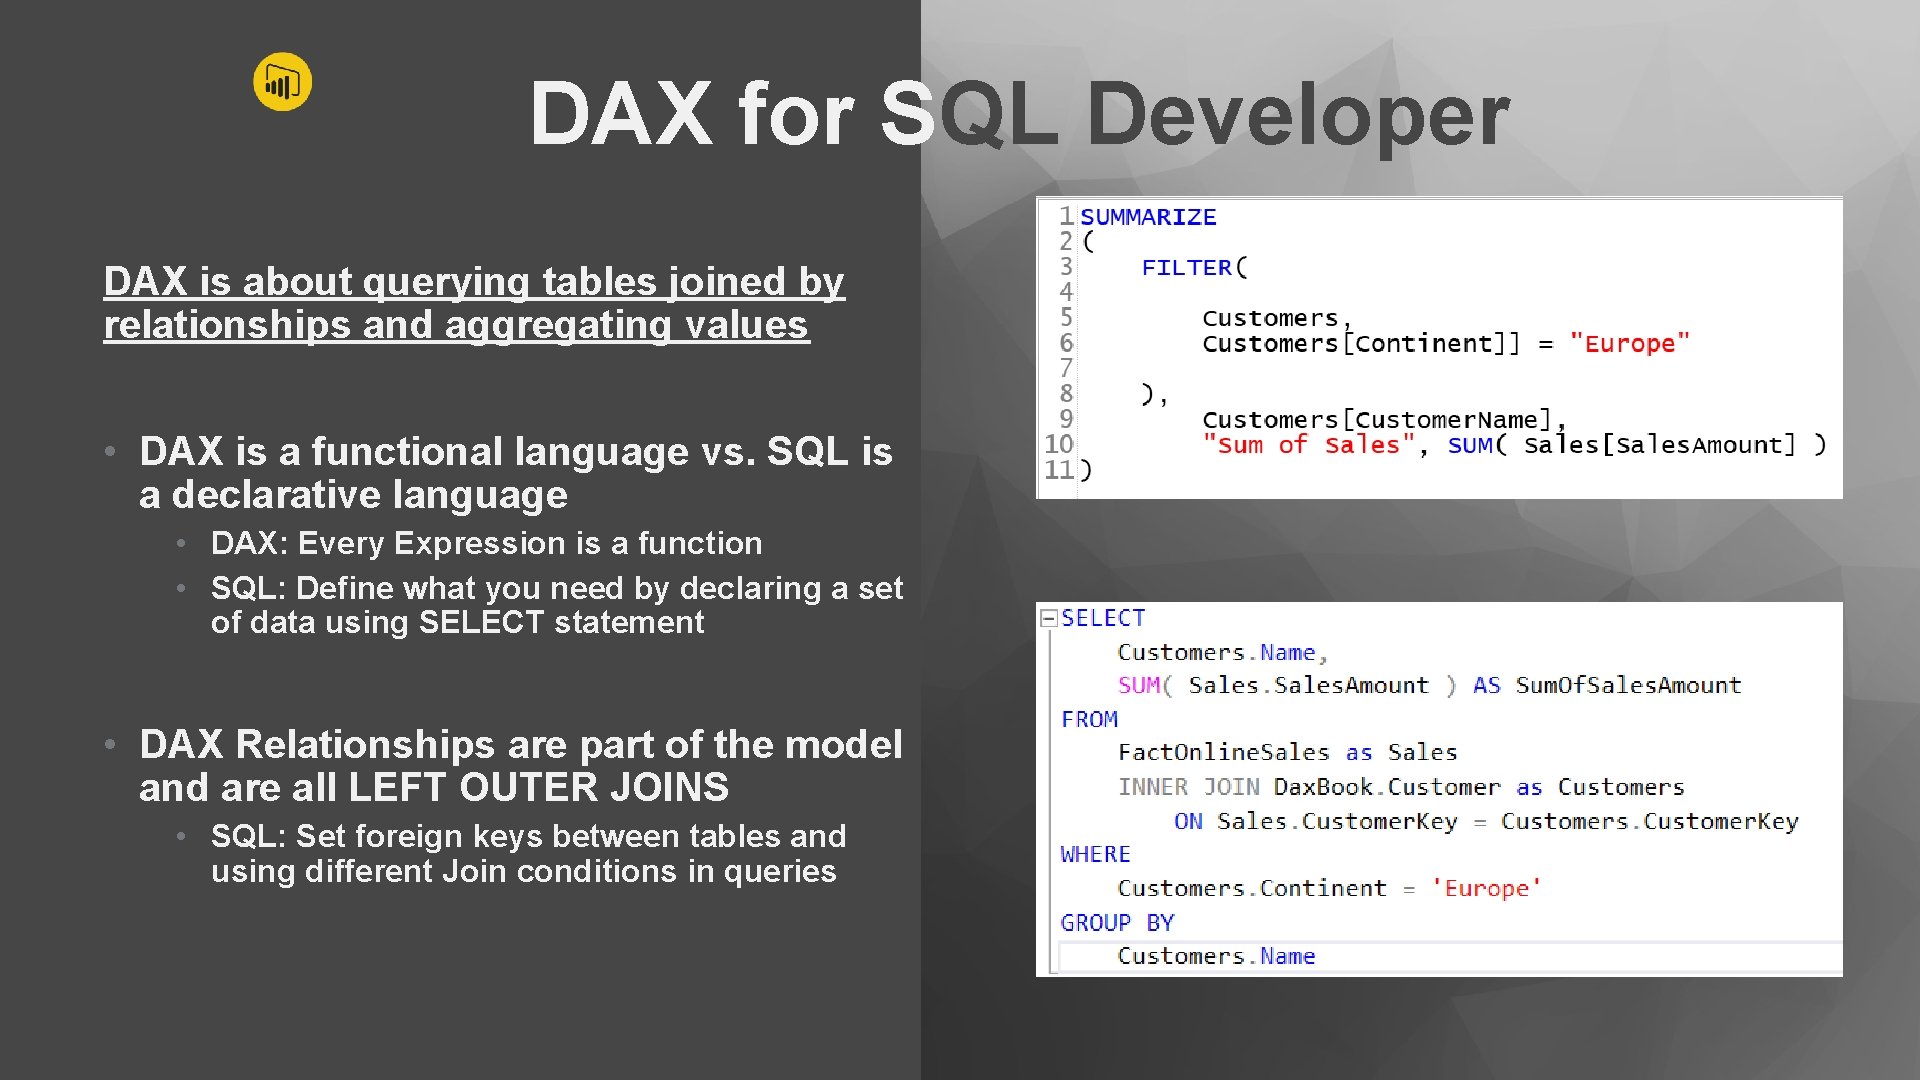 DAX for SQL Developer DAX is about querying tables joined by relationships and aggregating